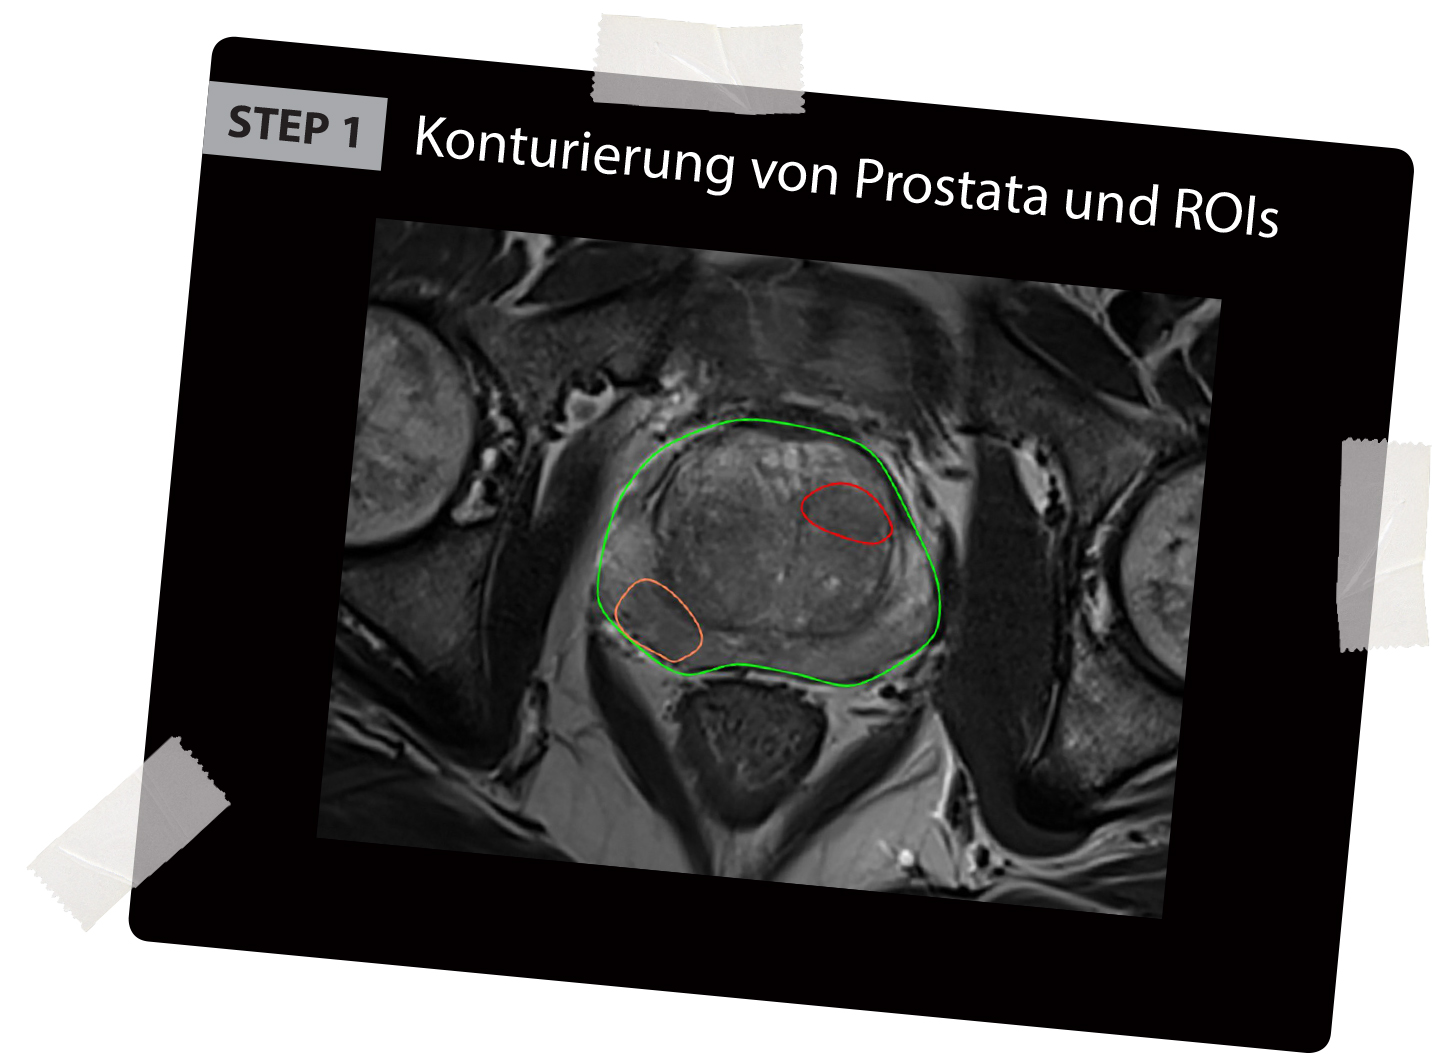 BioJet MRI-Fusionbiopsies first step contouring of the prostate and the suspicious areas in the MRI